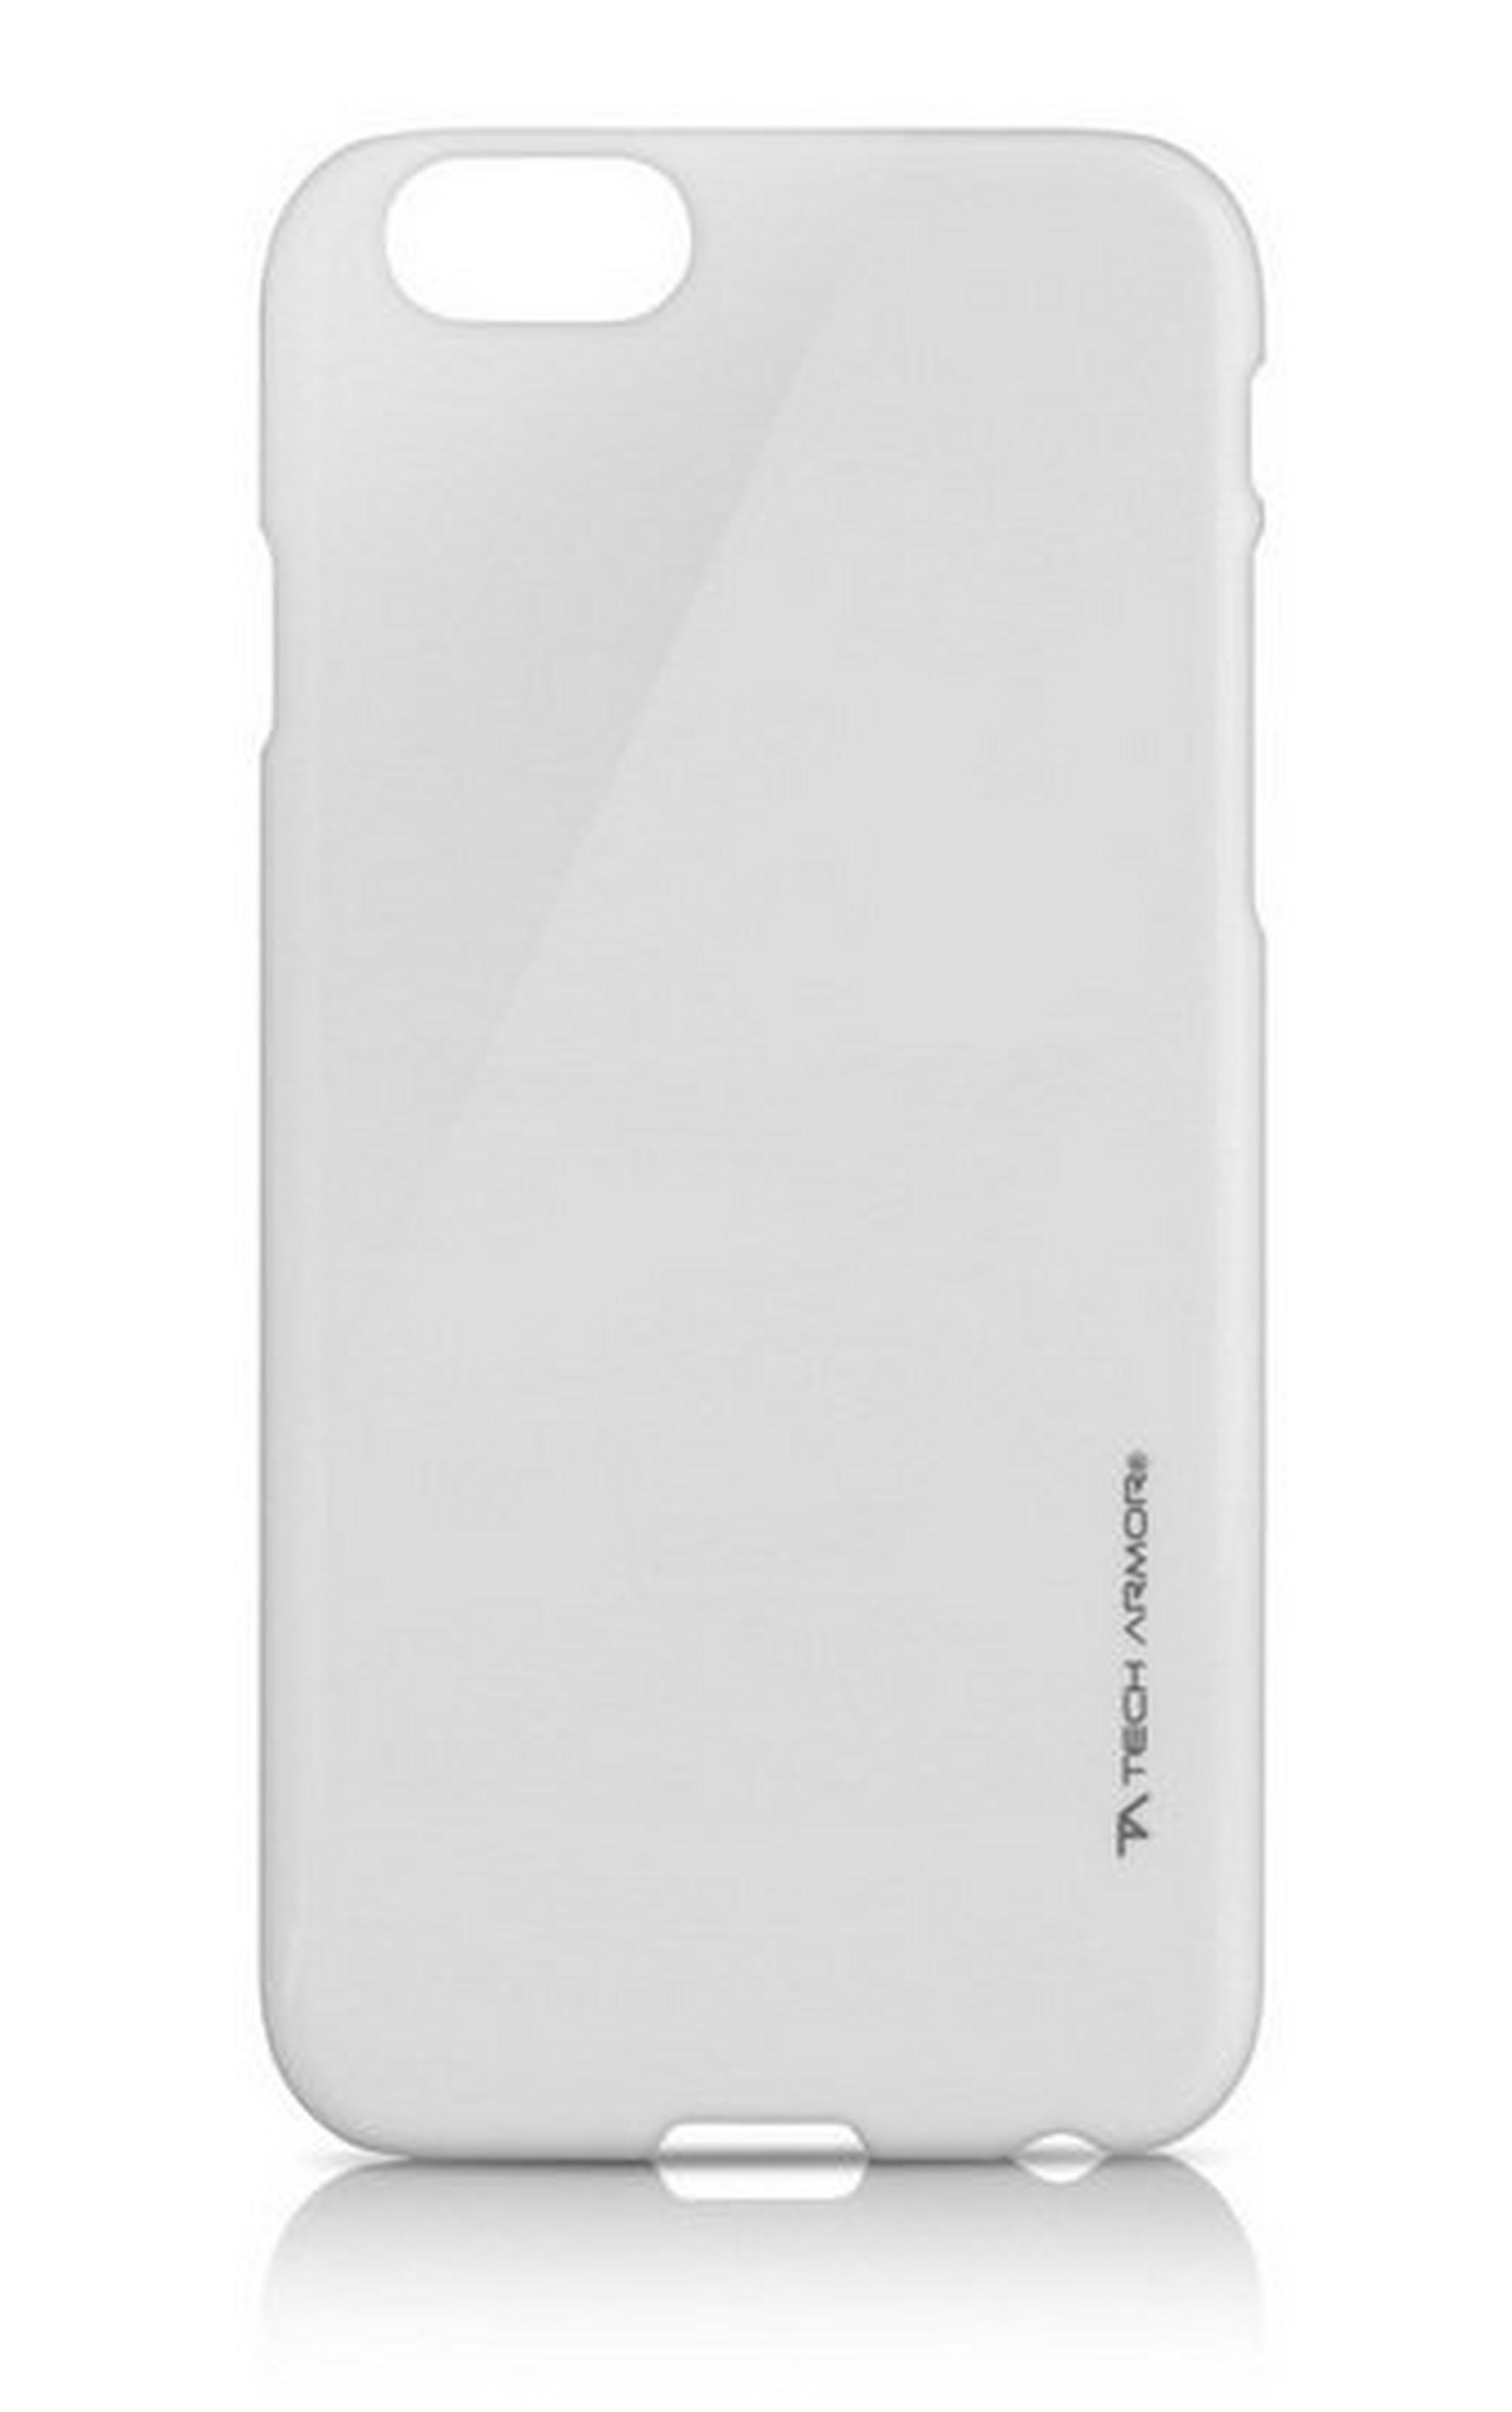 Tech Armor SlimProtect Case for iPhone 6 - White/Light Grey